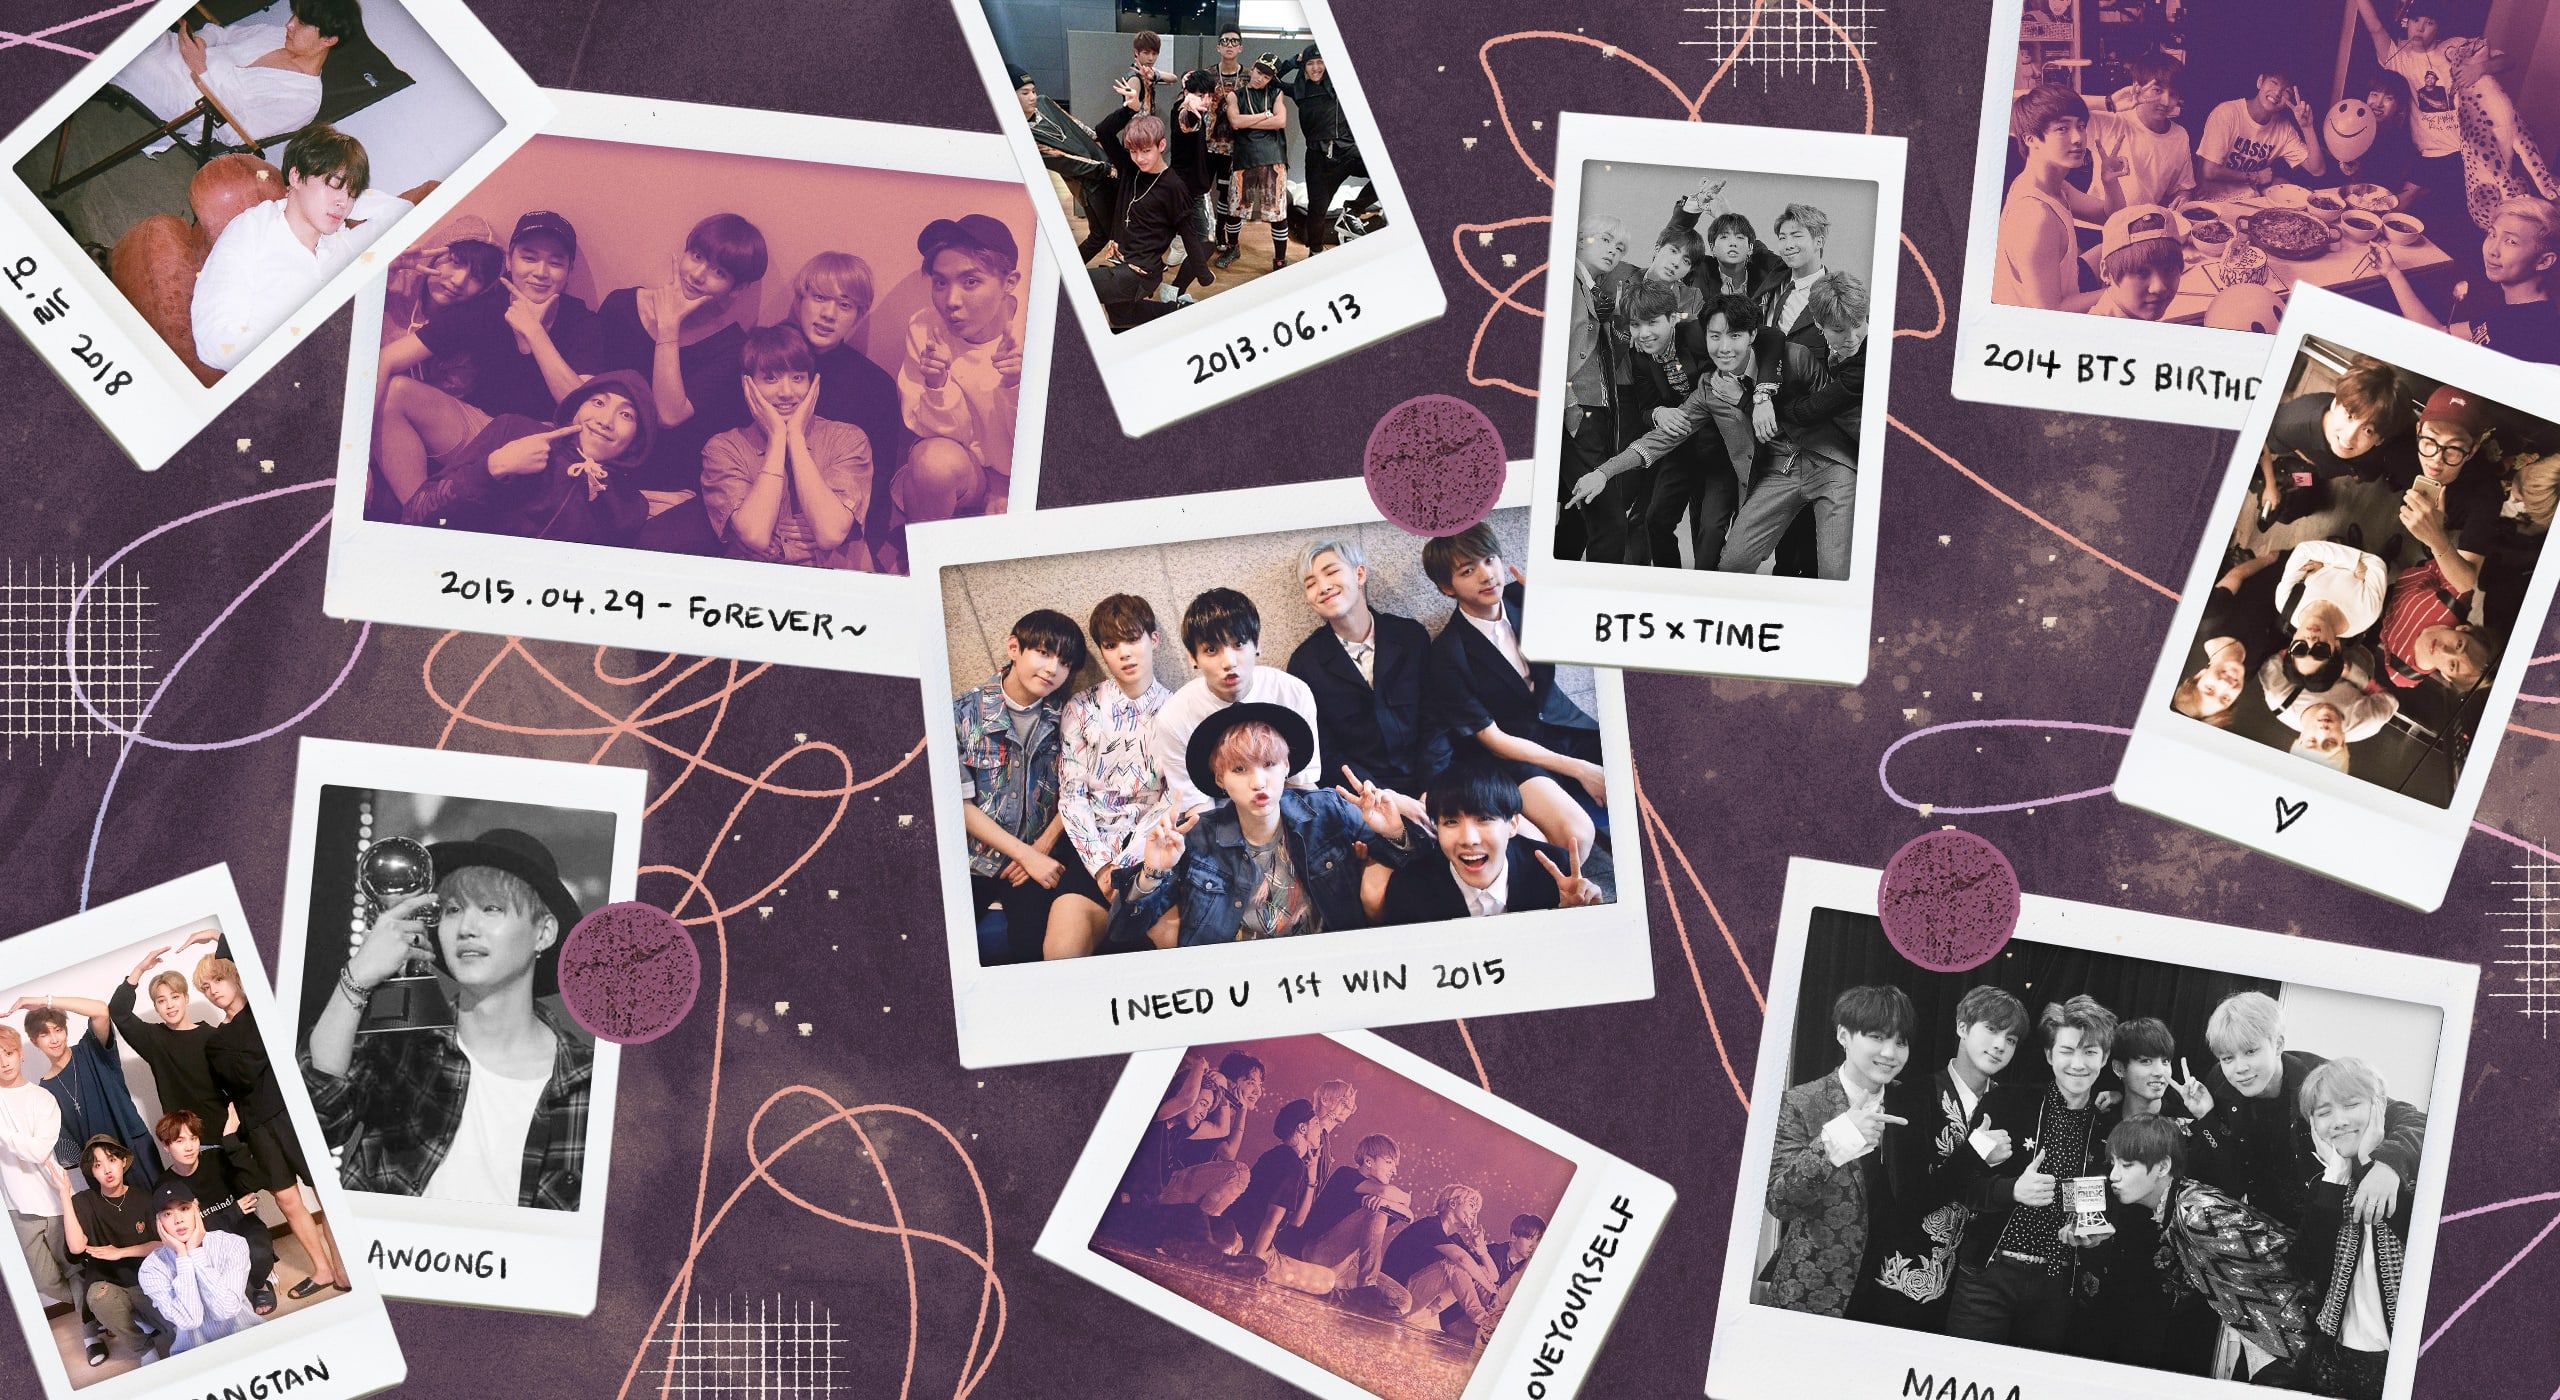 BTS Timeline: An Archive of BTS' History